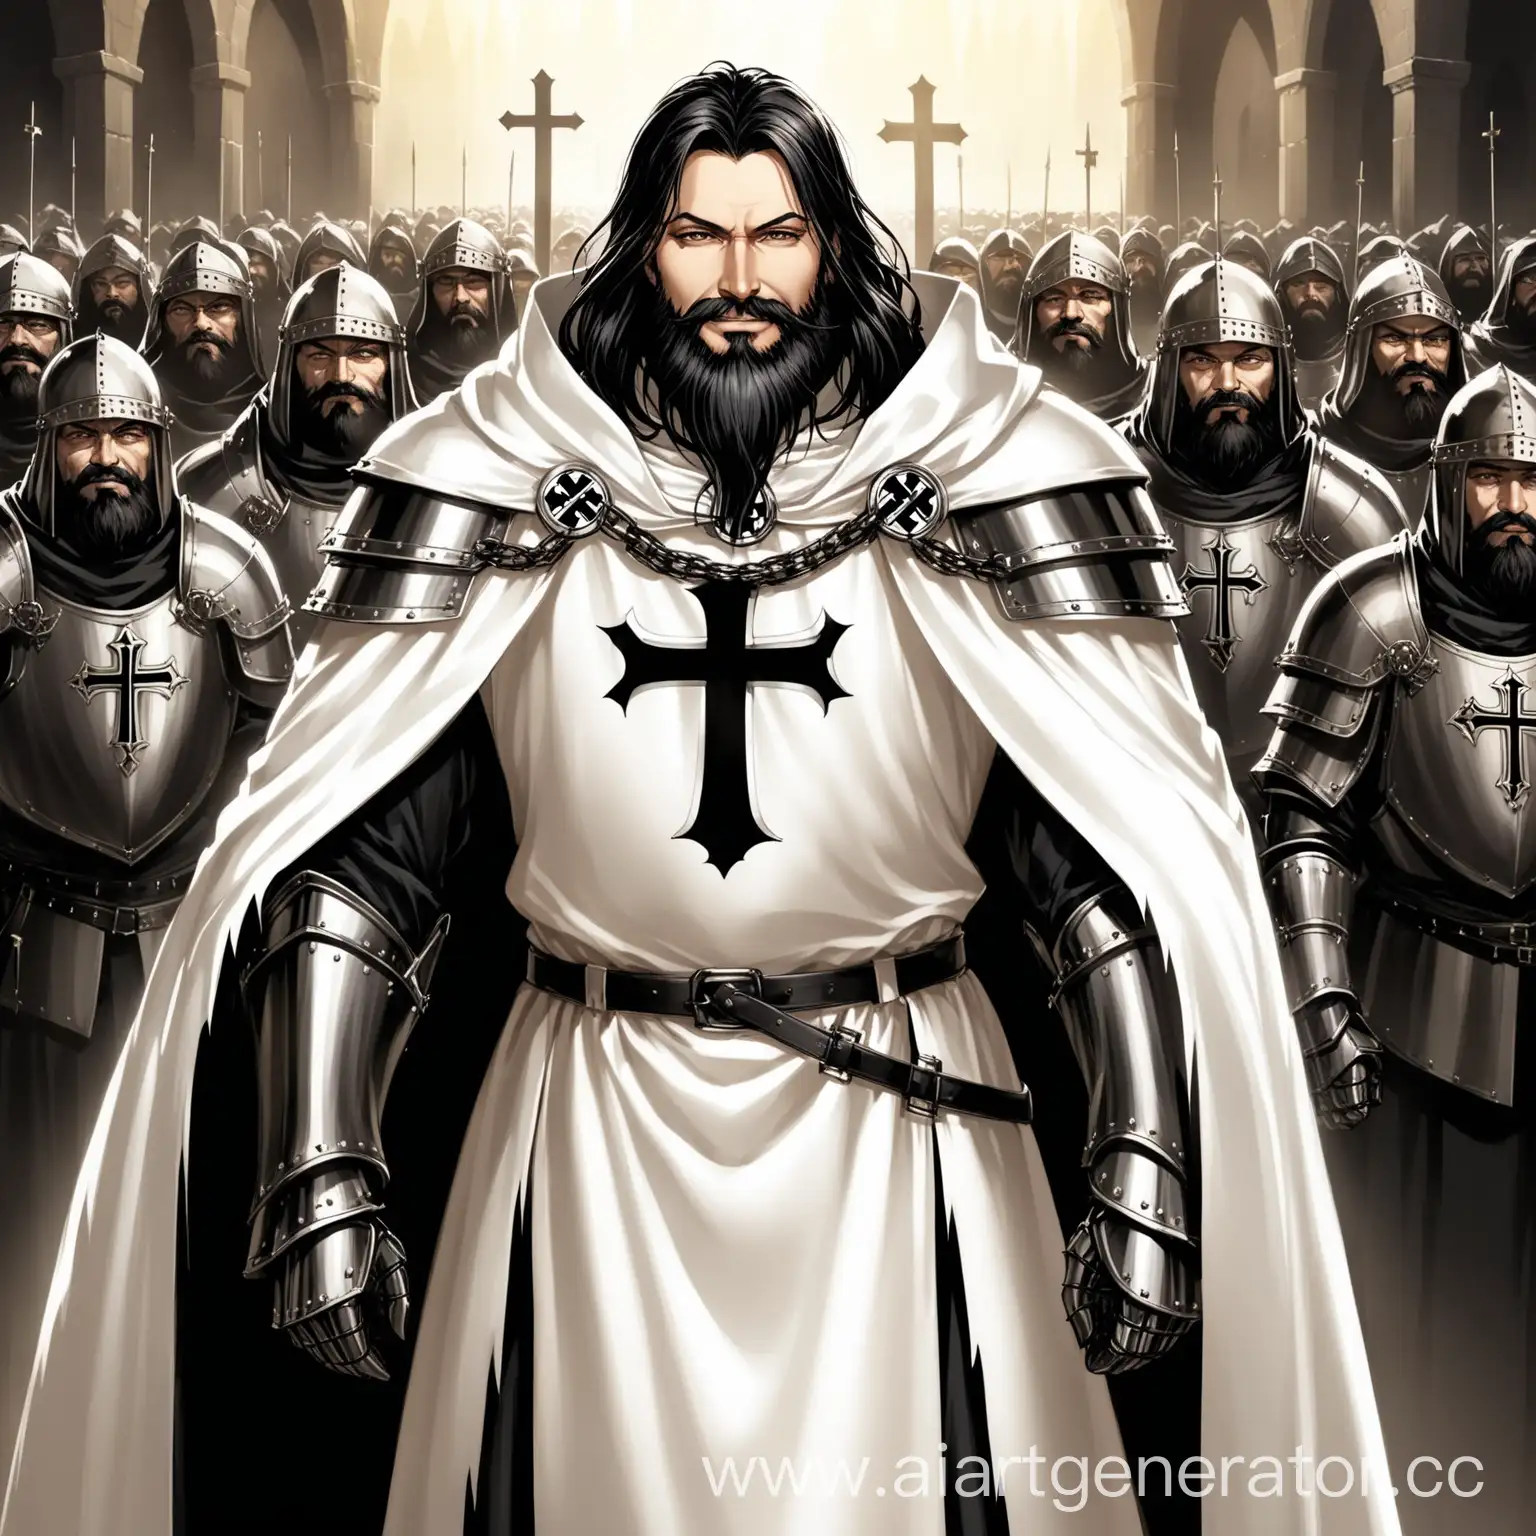 Chat generate the Grand Master of the Teutonic Order Winrich von Kniprode, who stands in 14th century armor, as well as in a white cloak with a black cross and a white mantle with a black gilded cross. On his face is a sly smile on his black beard. He has black long hair. And behind his army